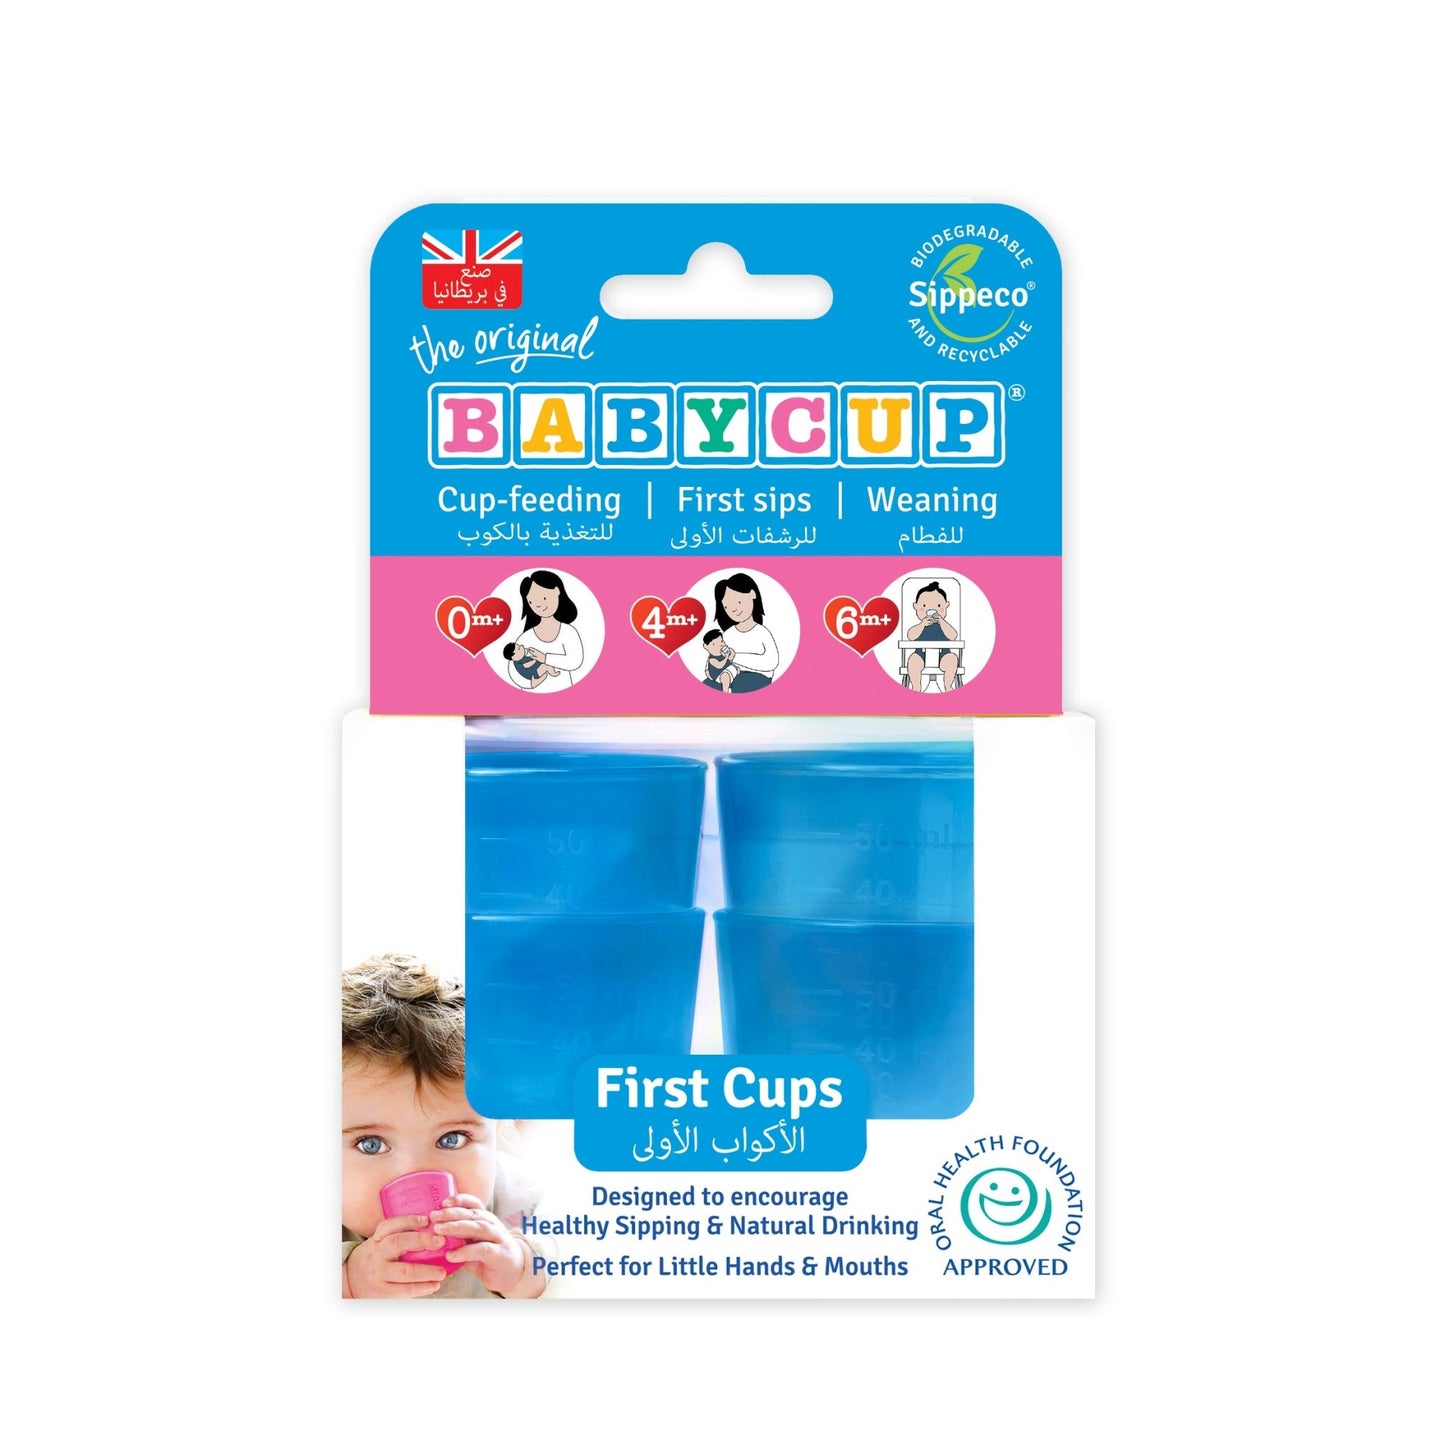 Babycup - Sippy Cups for Babies, Toddlers, Children - Blue - Neo Essentials Store